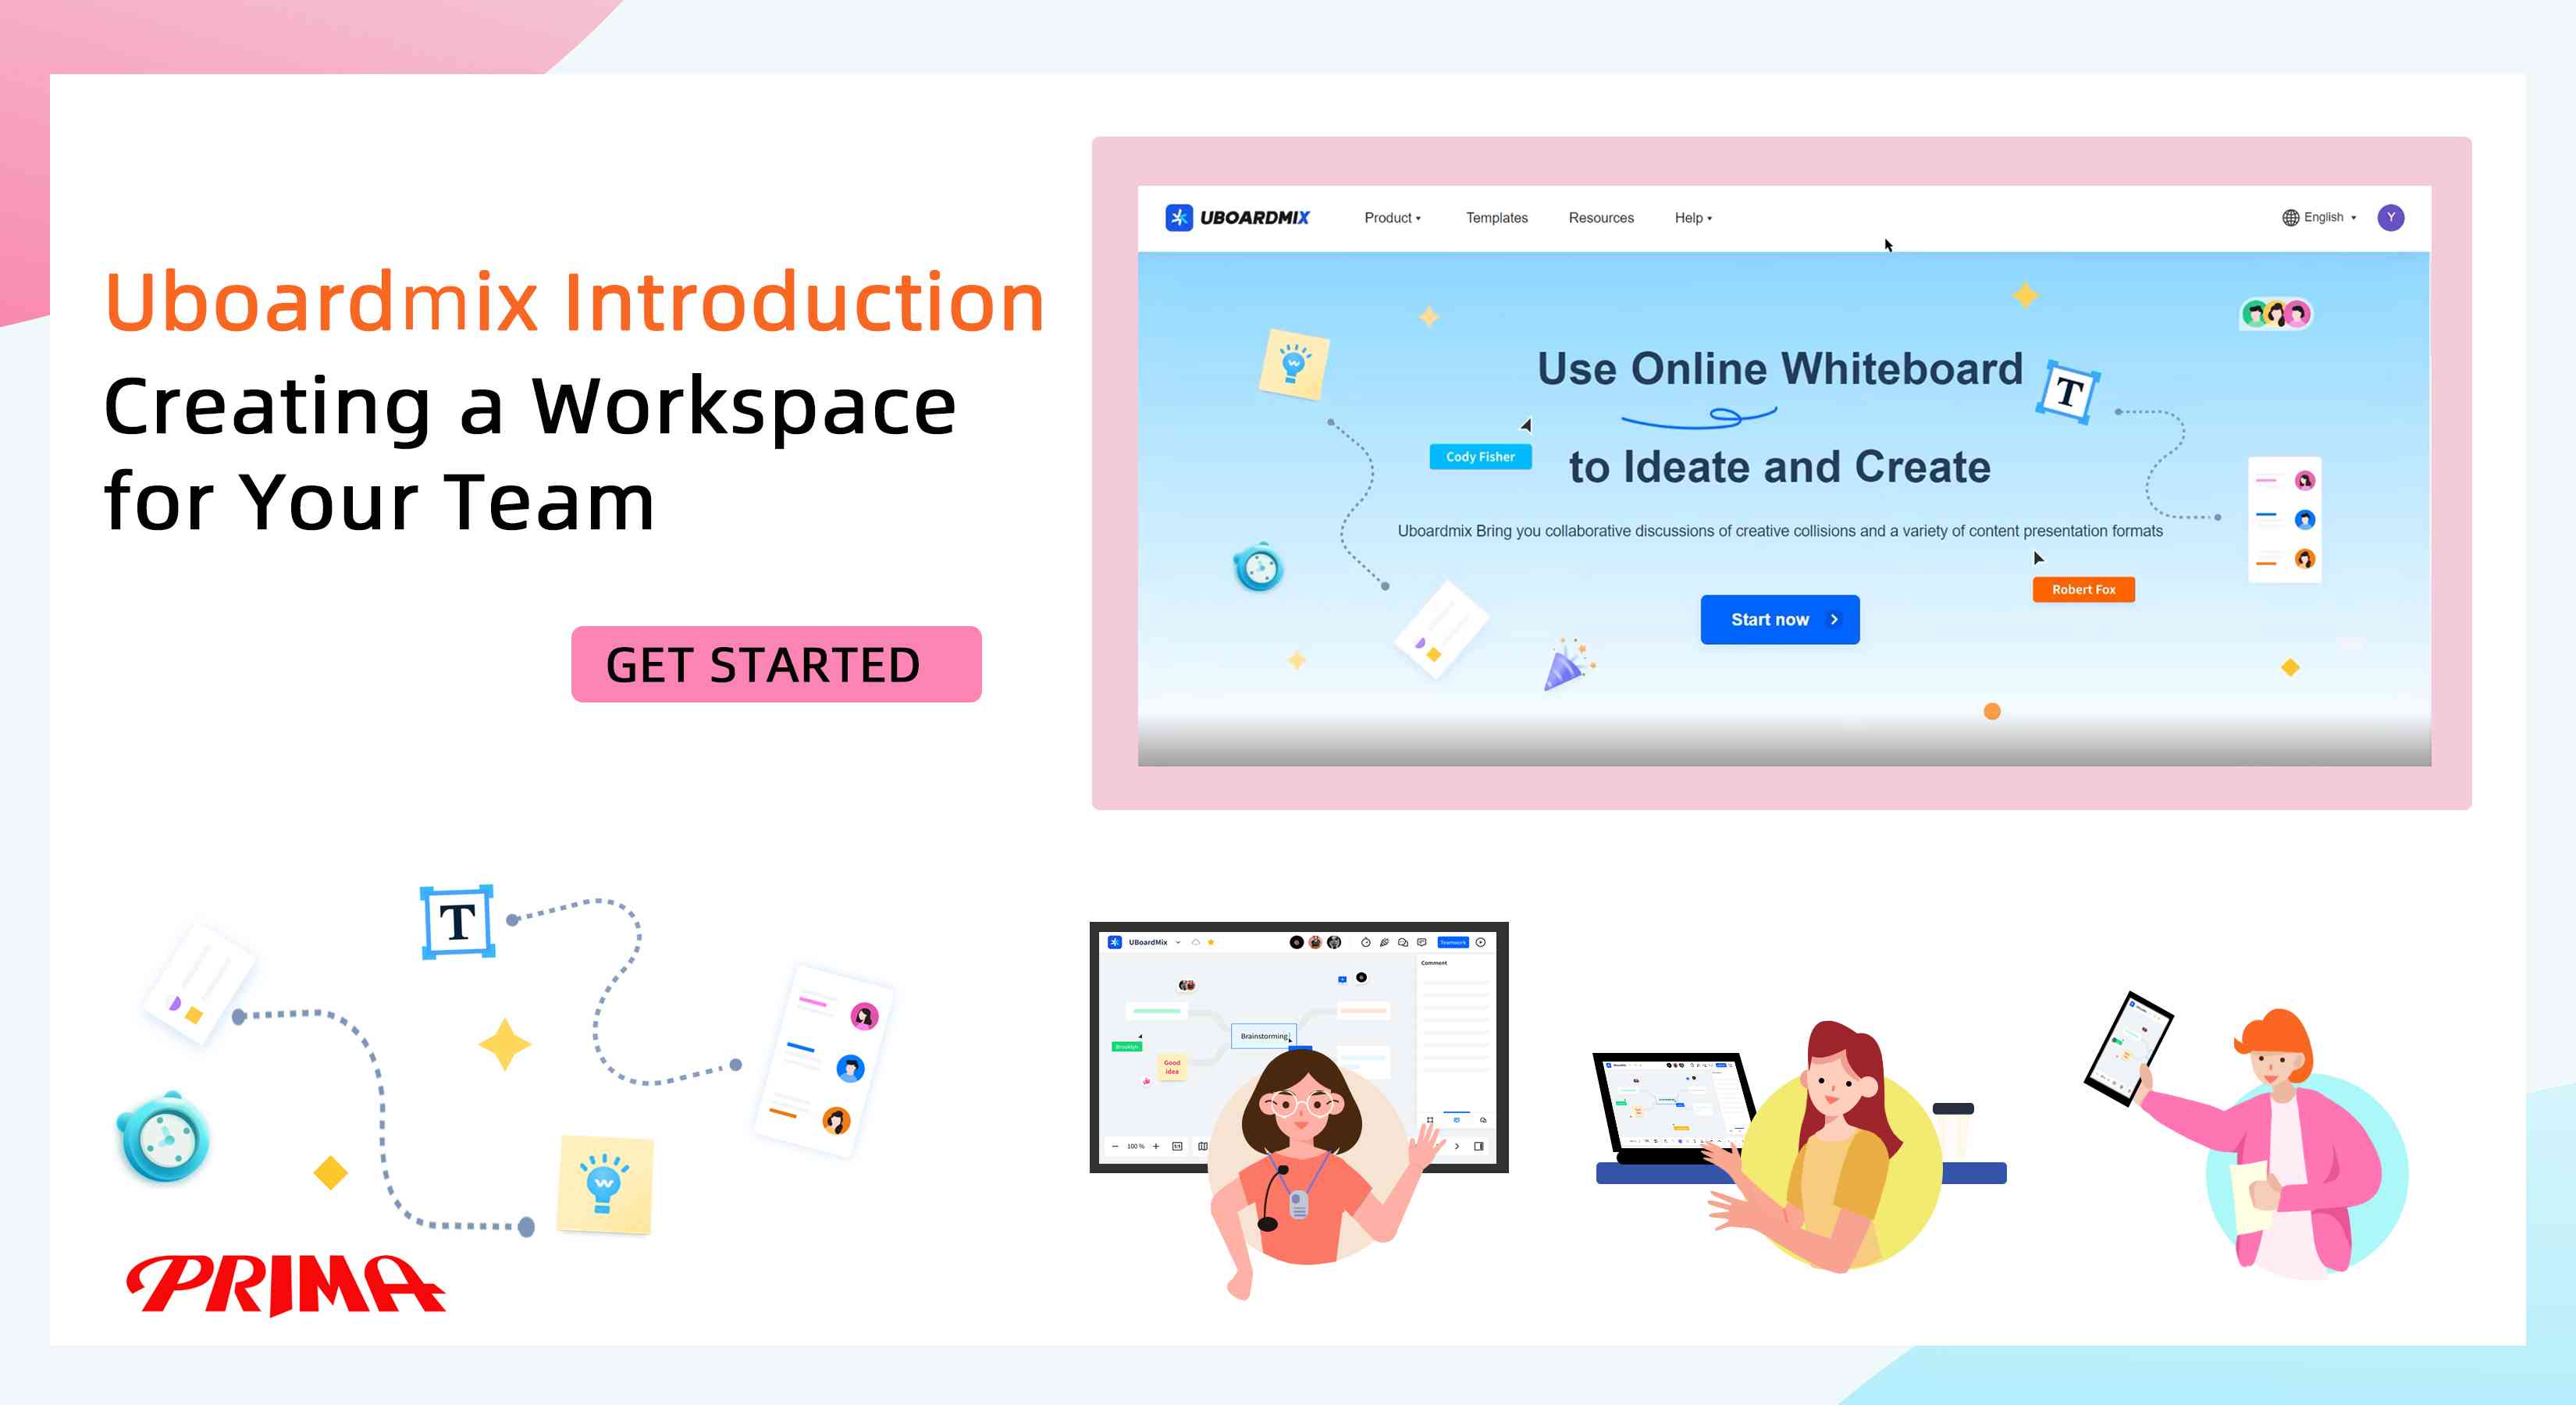 Creating a Workspace for Your Team